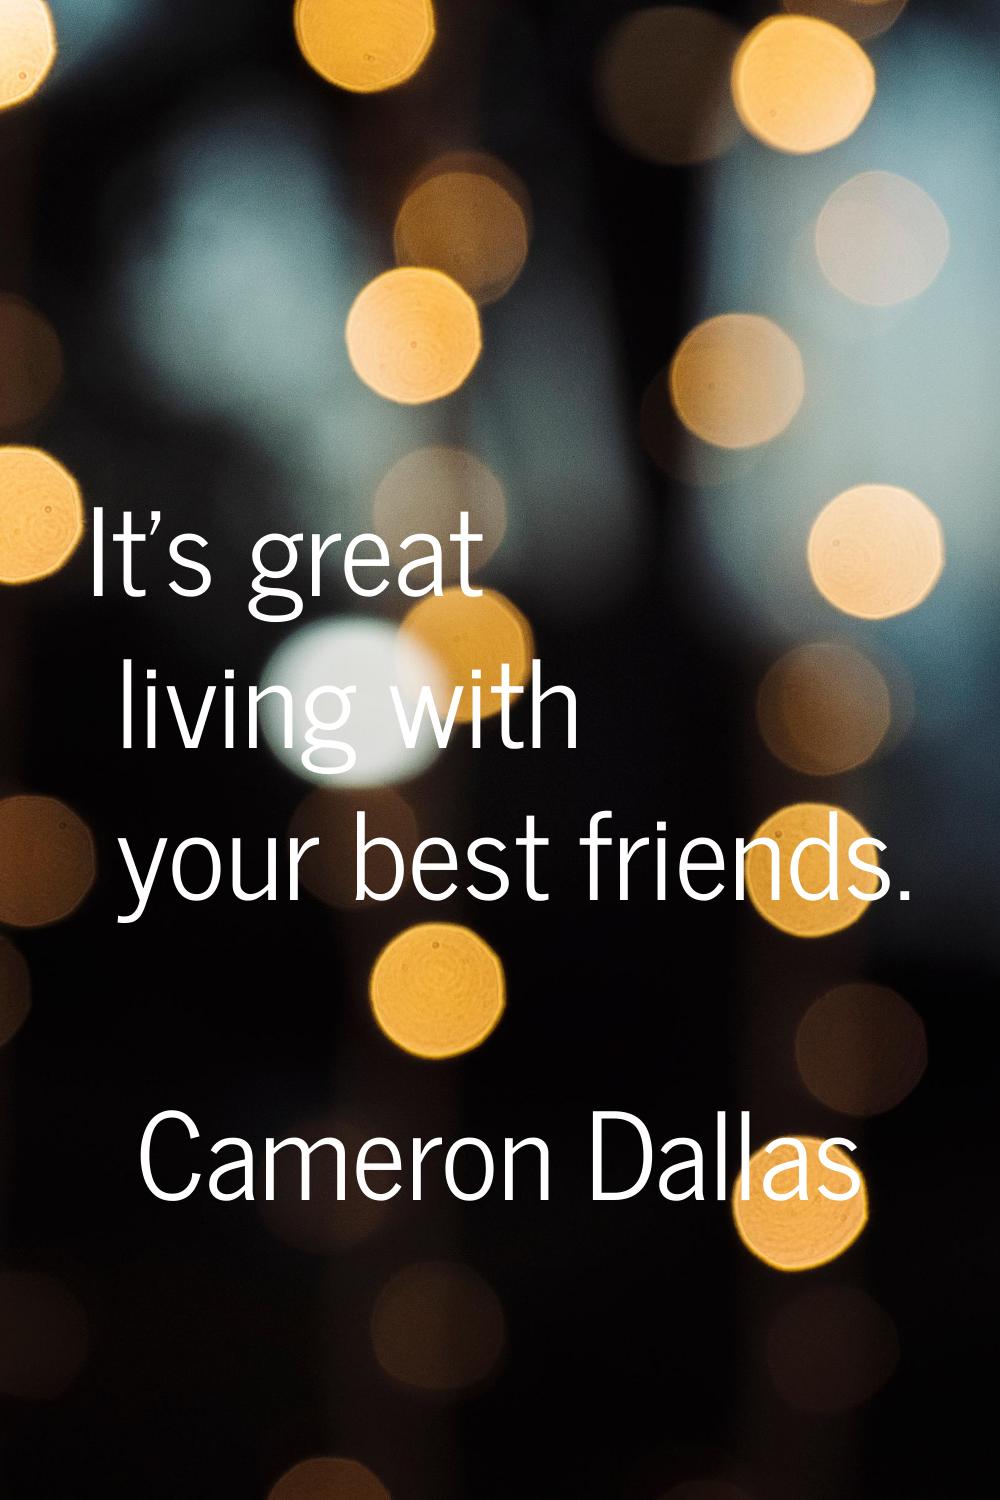 It's great living with your best friends.